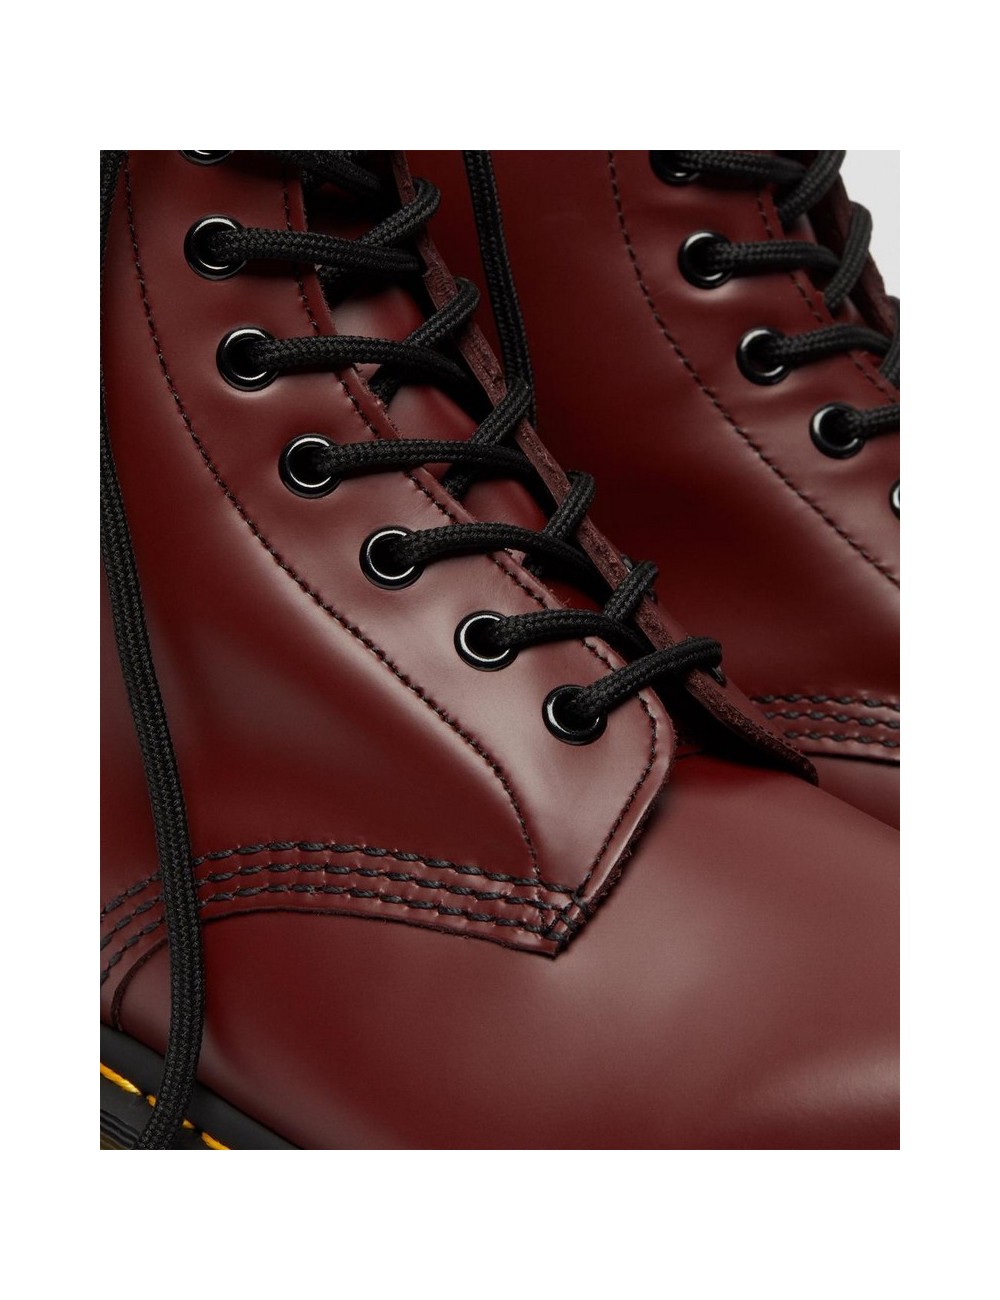 BOTAS UNISEX DR MARTENS 1460 SMOOTH CHERRY RED